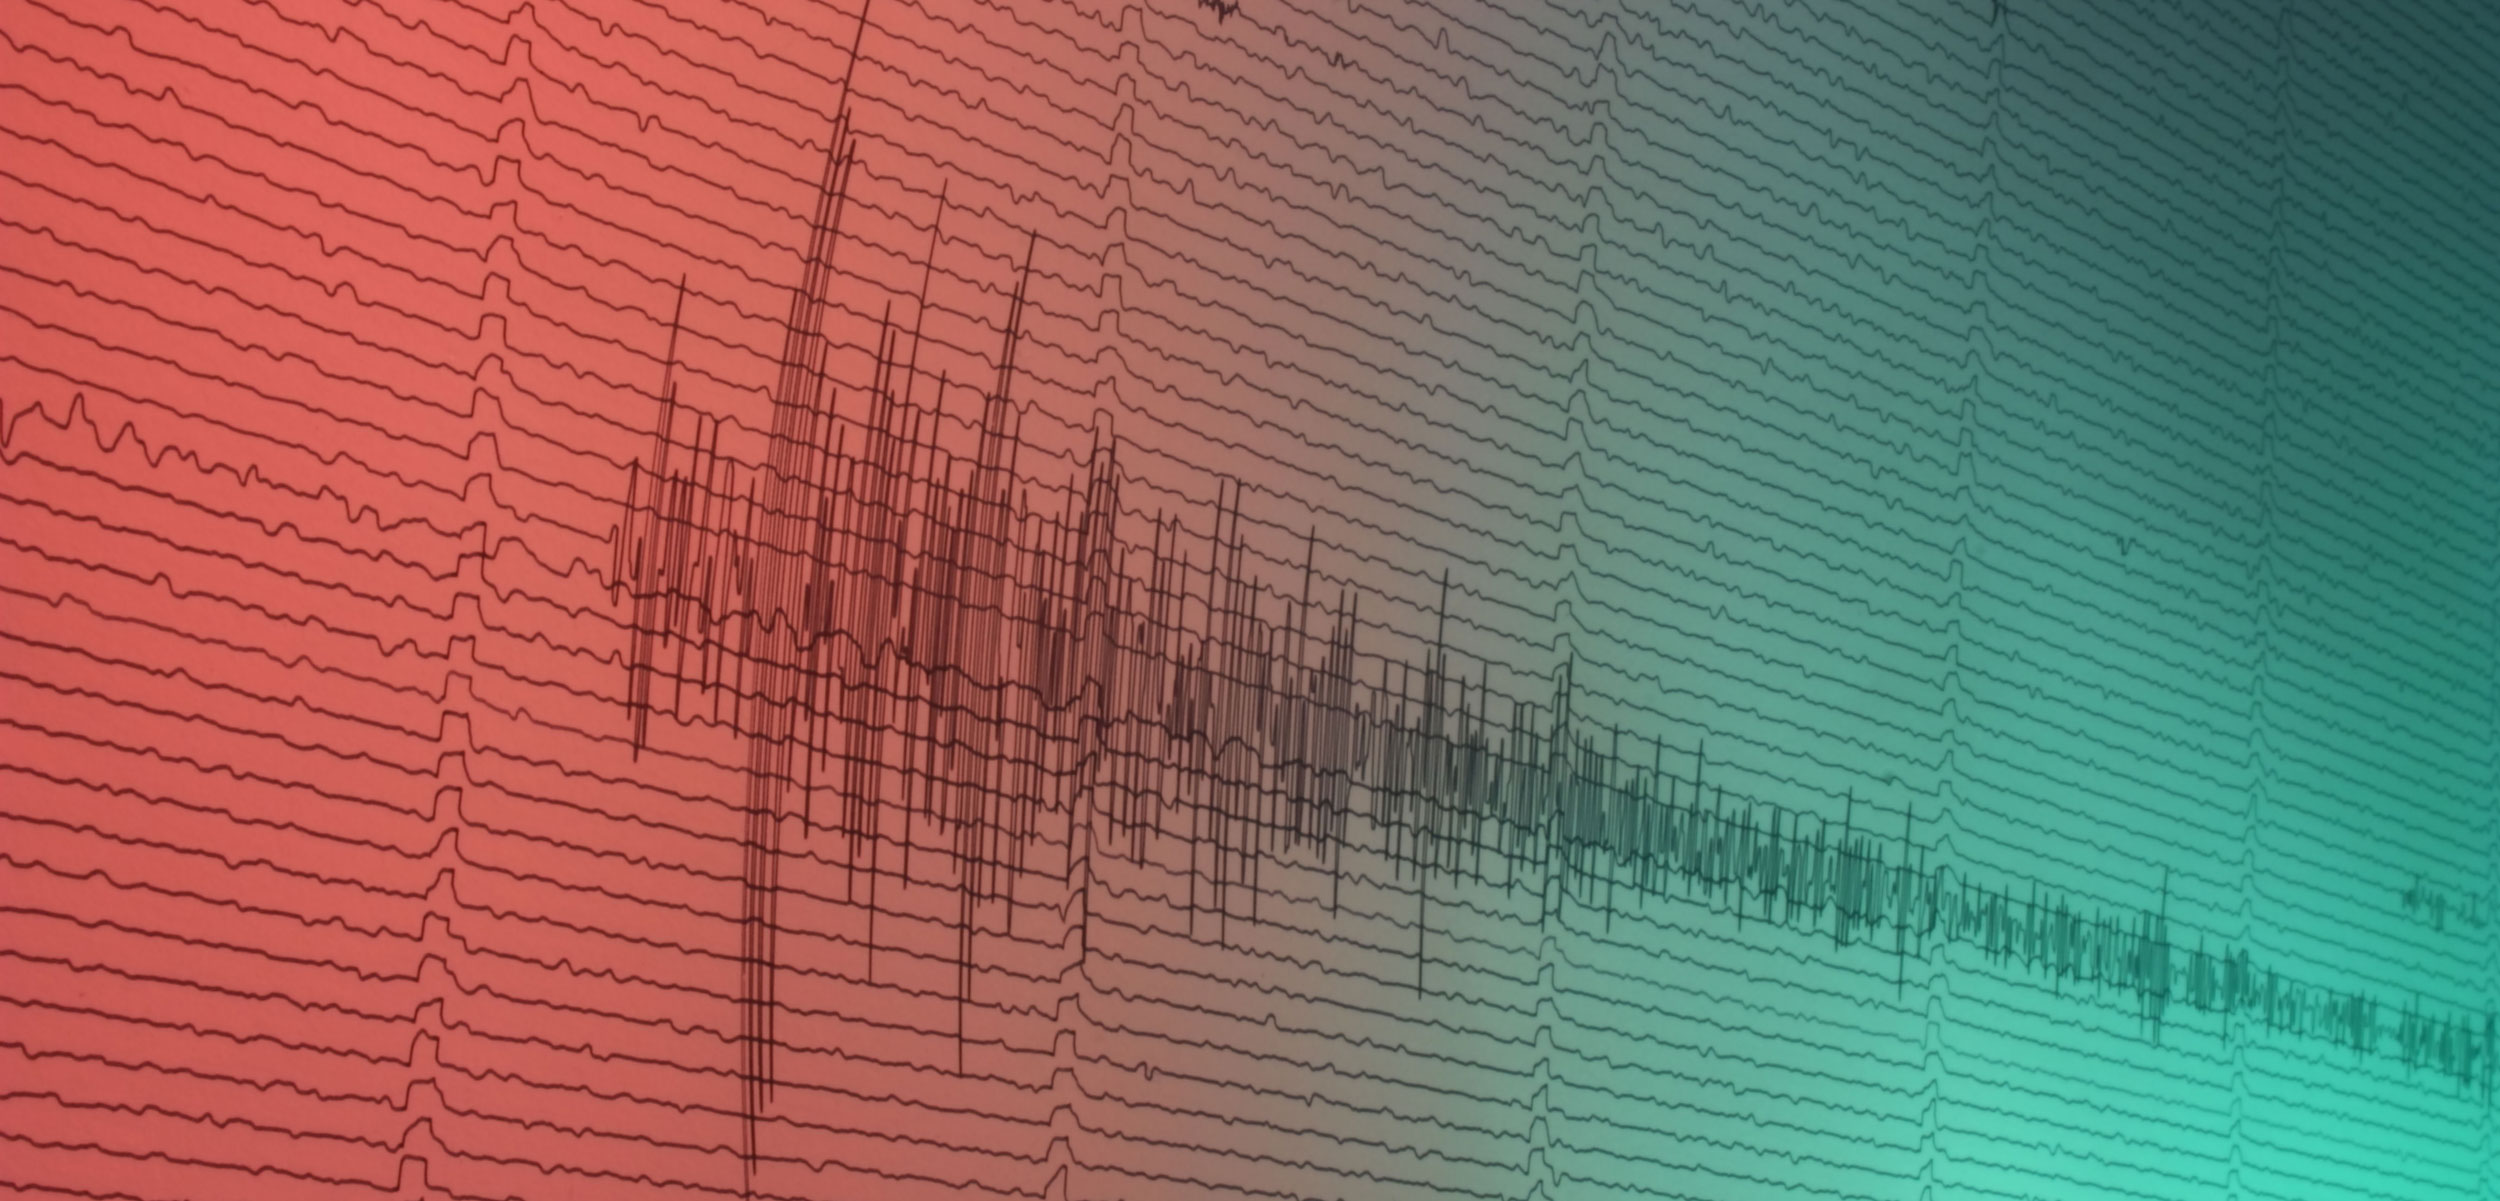 a large earthquake recorded on a seismograph